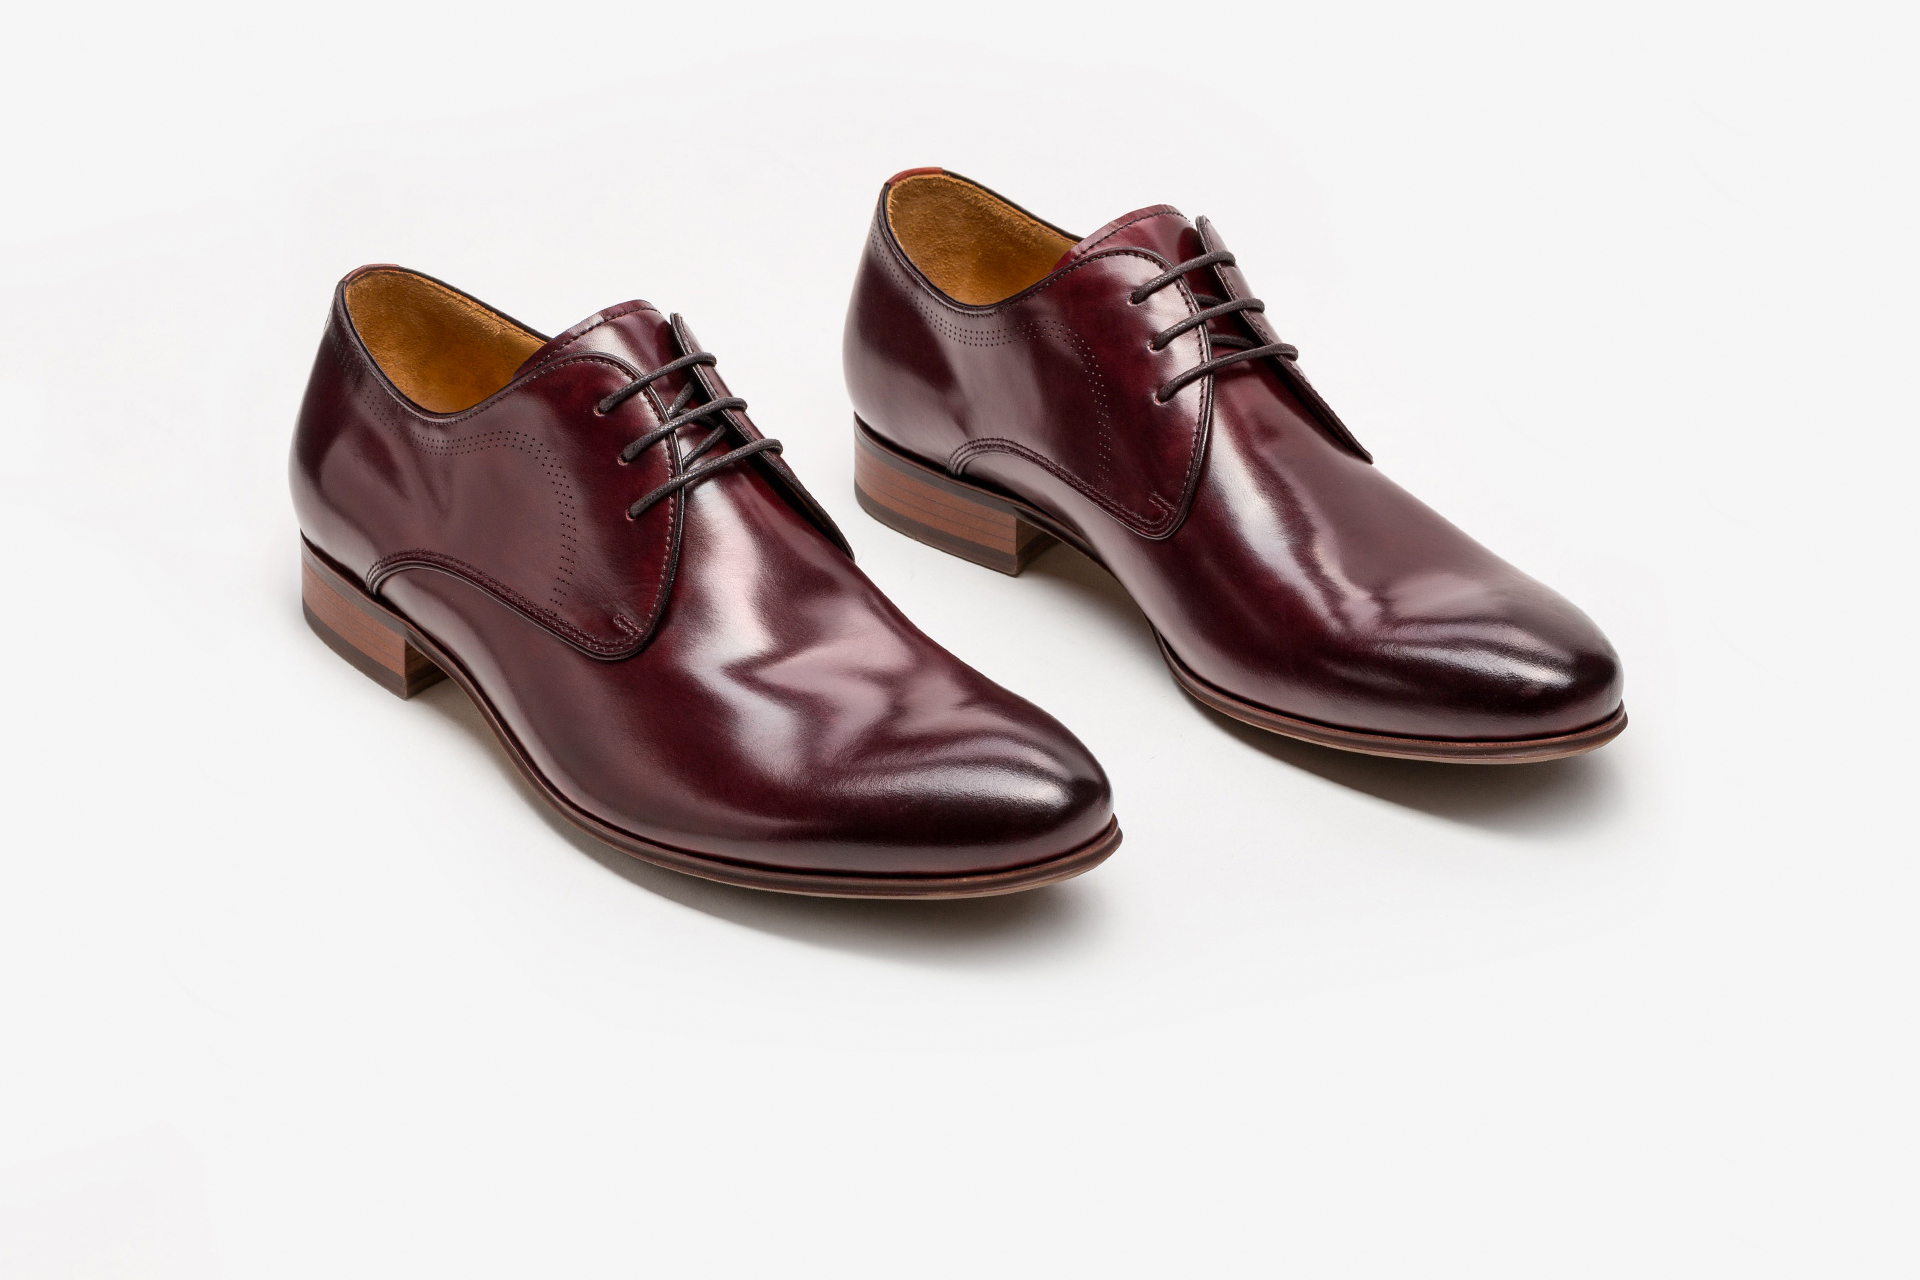 What Color Shoes To Wear With Burgundy Dress